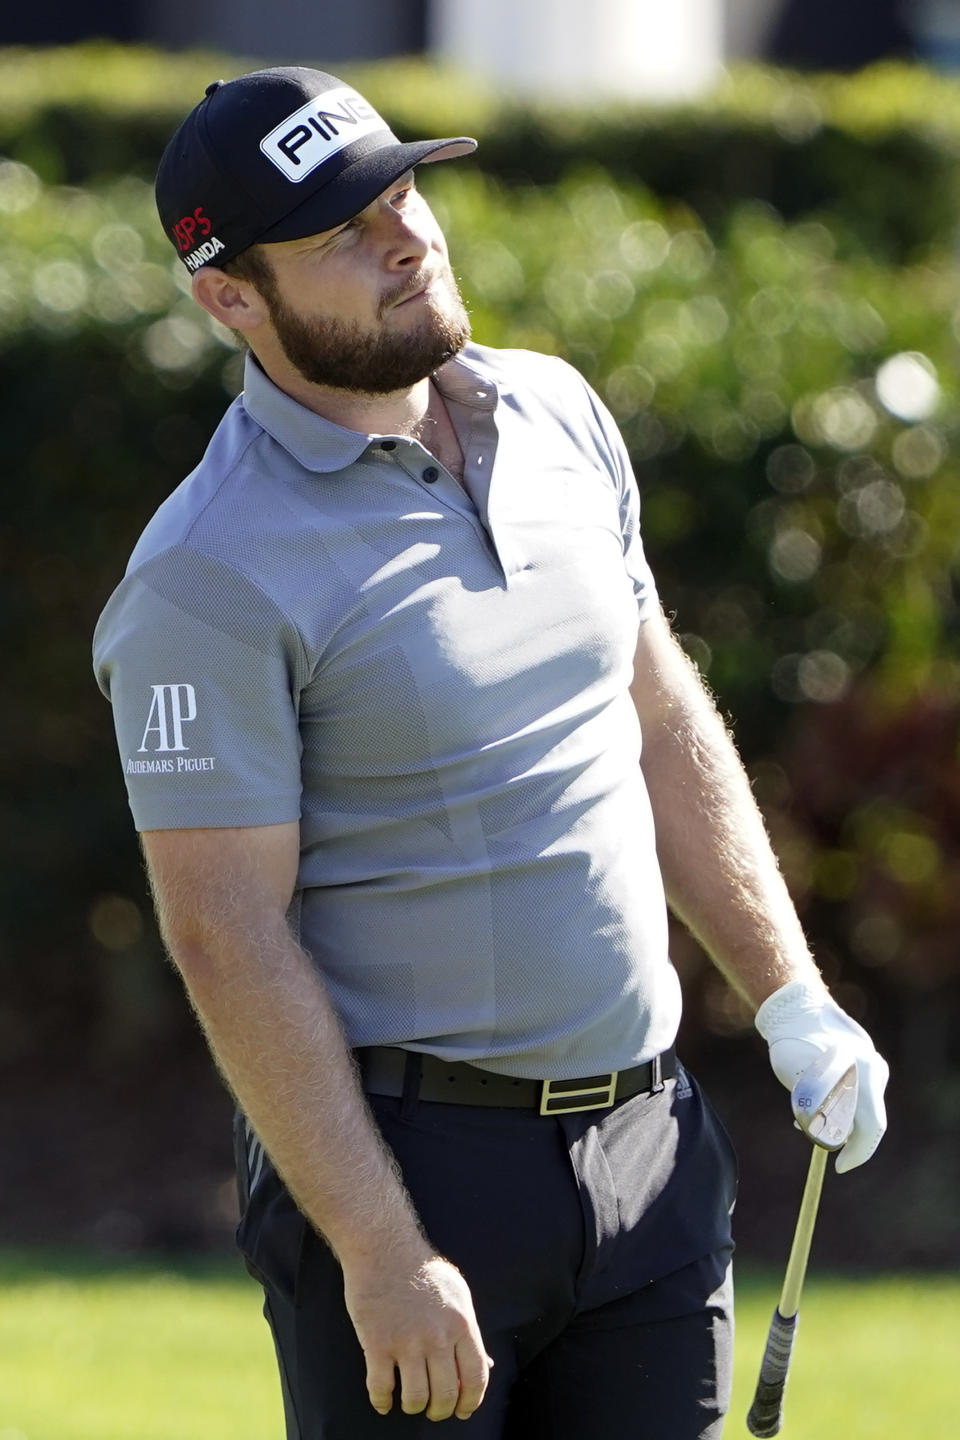 Tyrrell Hatton, of England, watches his shot from the 16th fairway during the second round of the Arnold Palmer Invitational golf tournament Friday, March 4, 2022, in Orlando, Fla. (AP Photo/John Raoux)